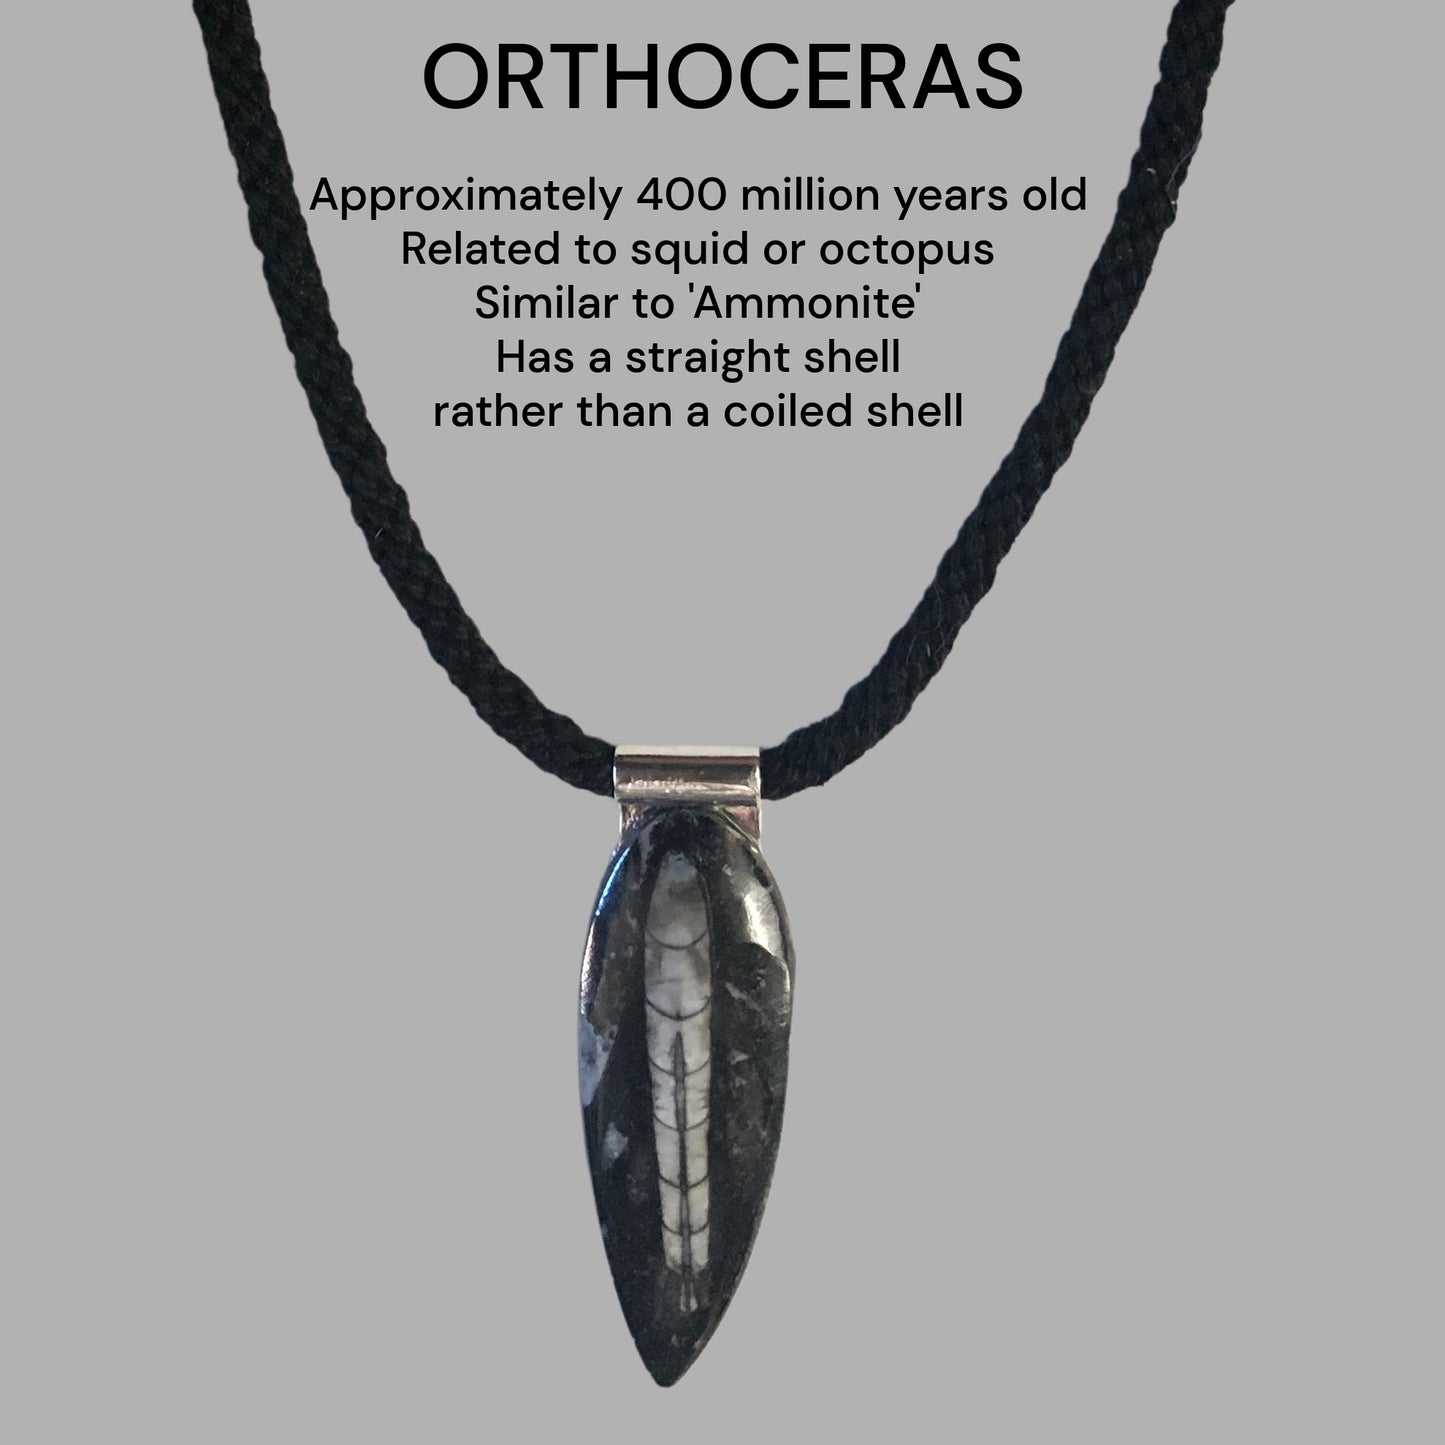 Close up of the Orthoceras stone plus informational text